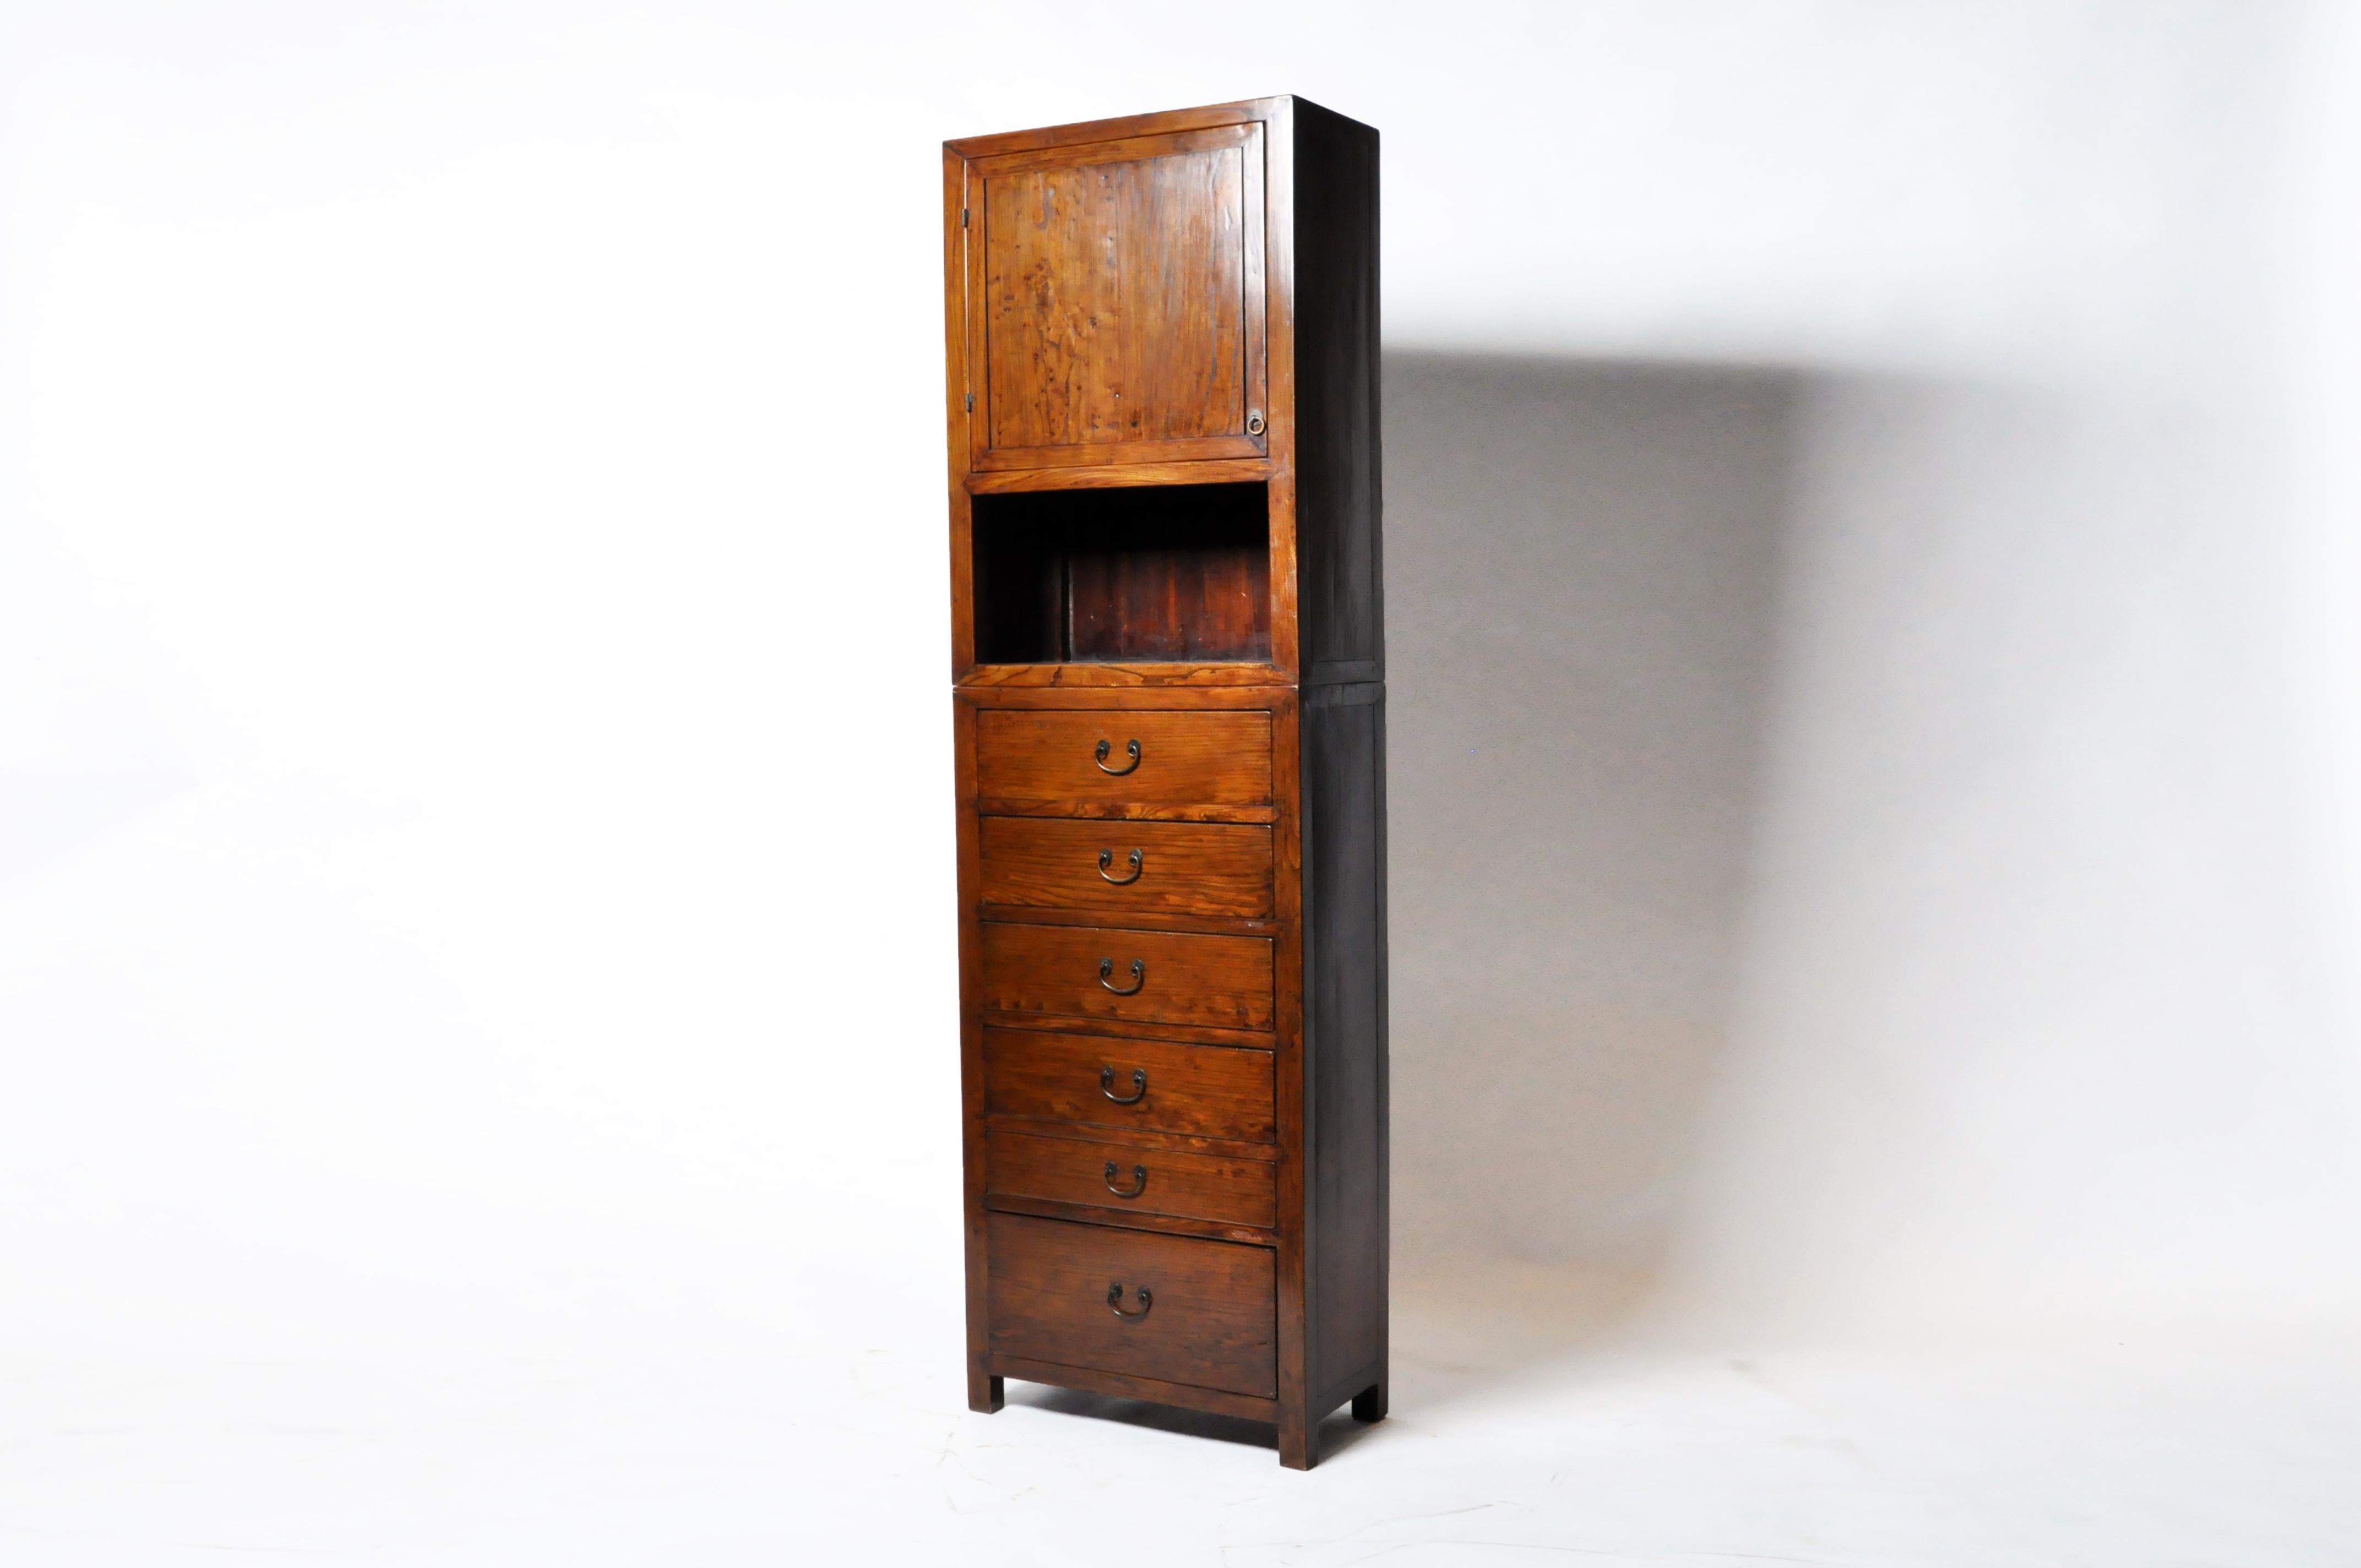 This contemporary piece of furniture features reclaimed elm wood with traditional nail-less joinery and a rich French polish finish. The piece is quite sturdy and heavy given its slim footprint. The drawers feature modern ball-bearing full-extension